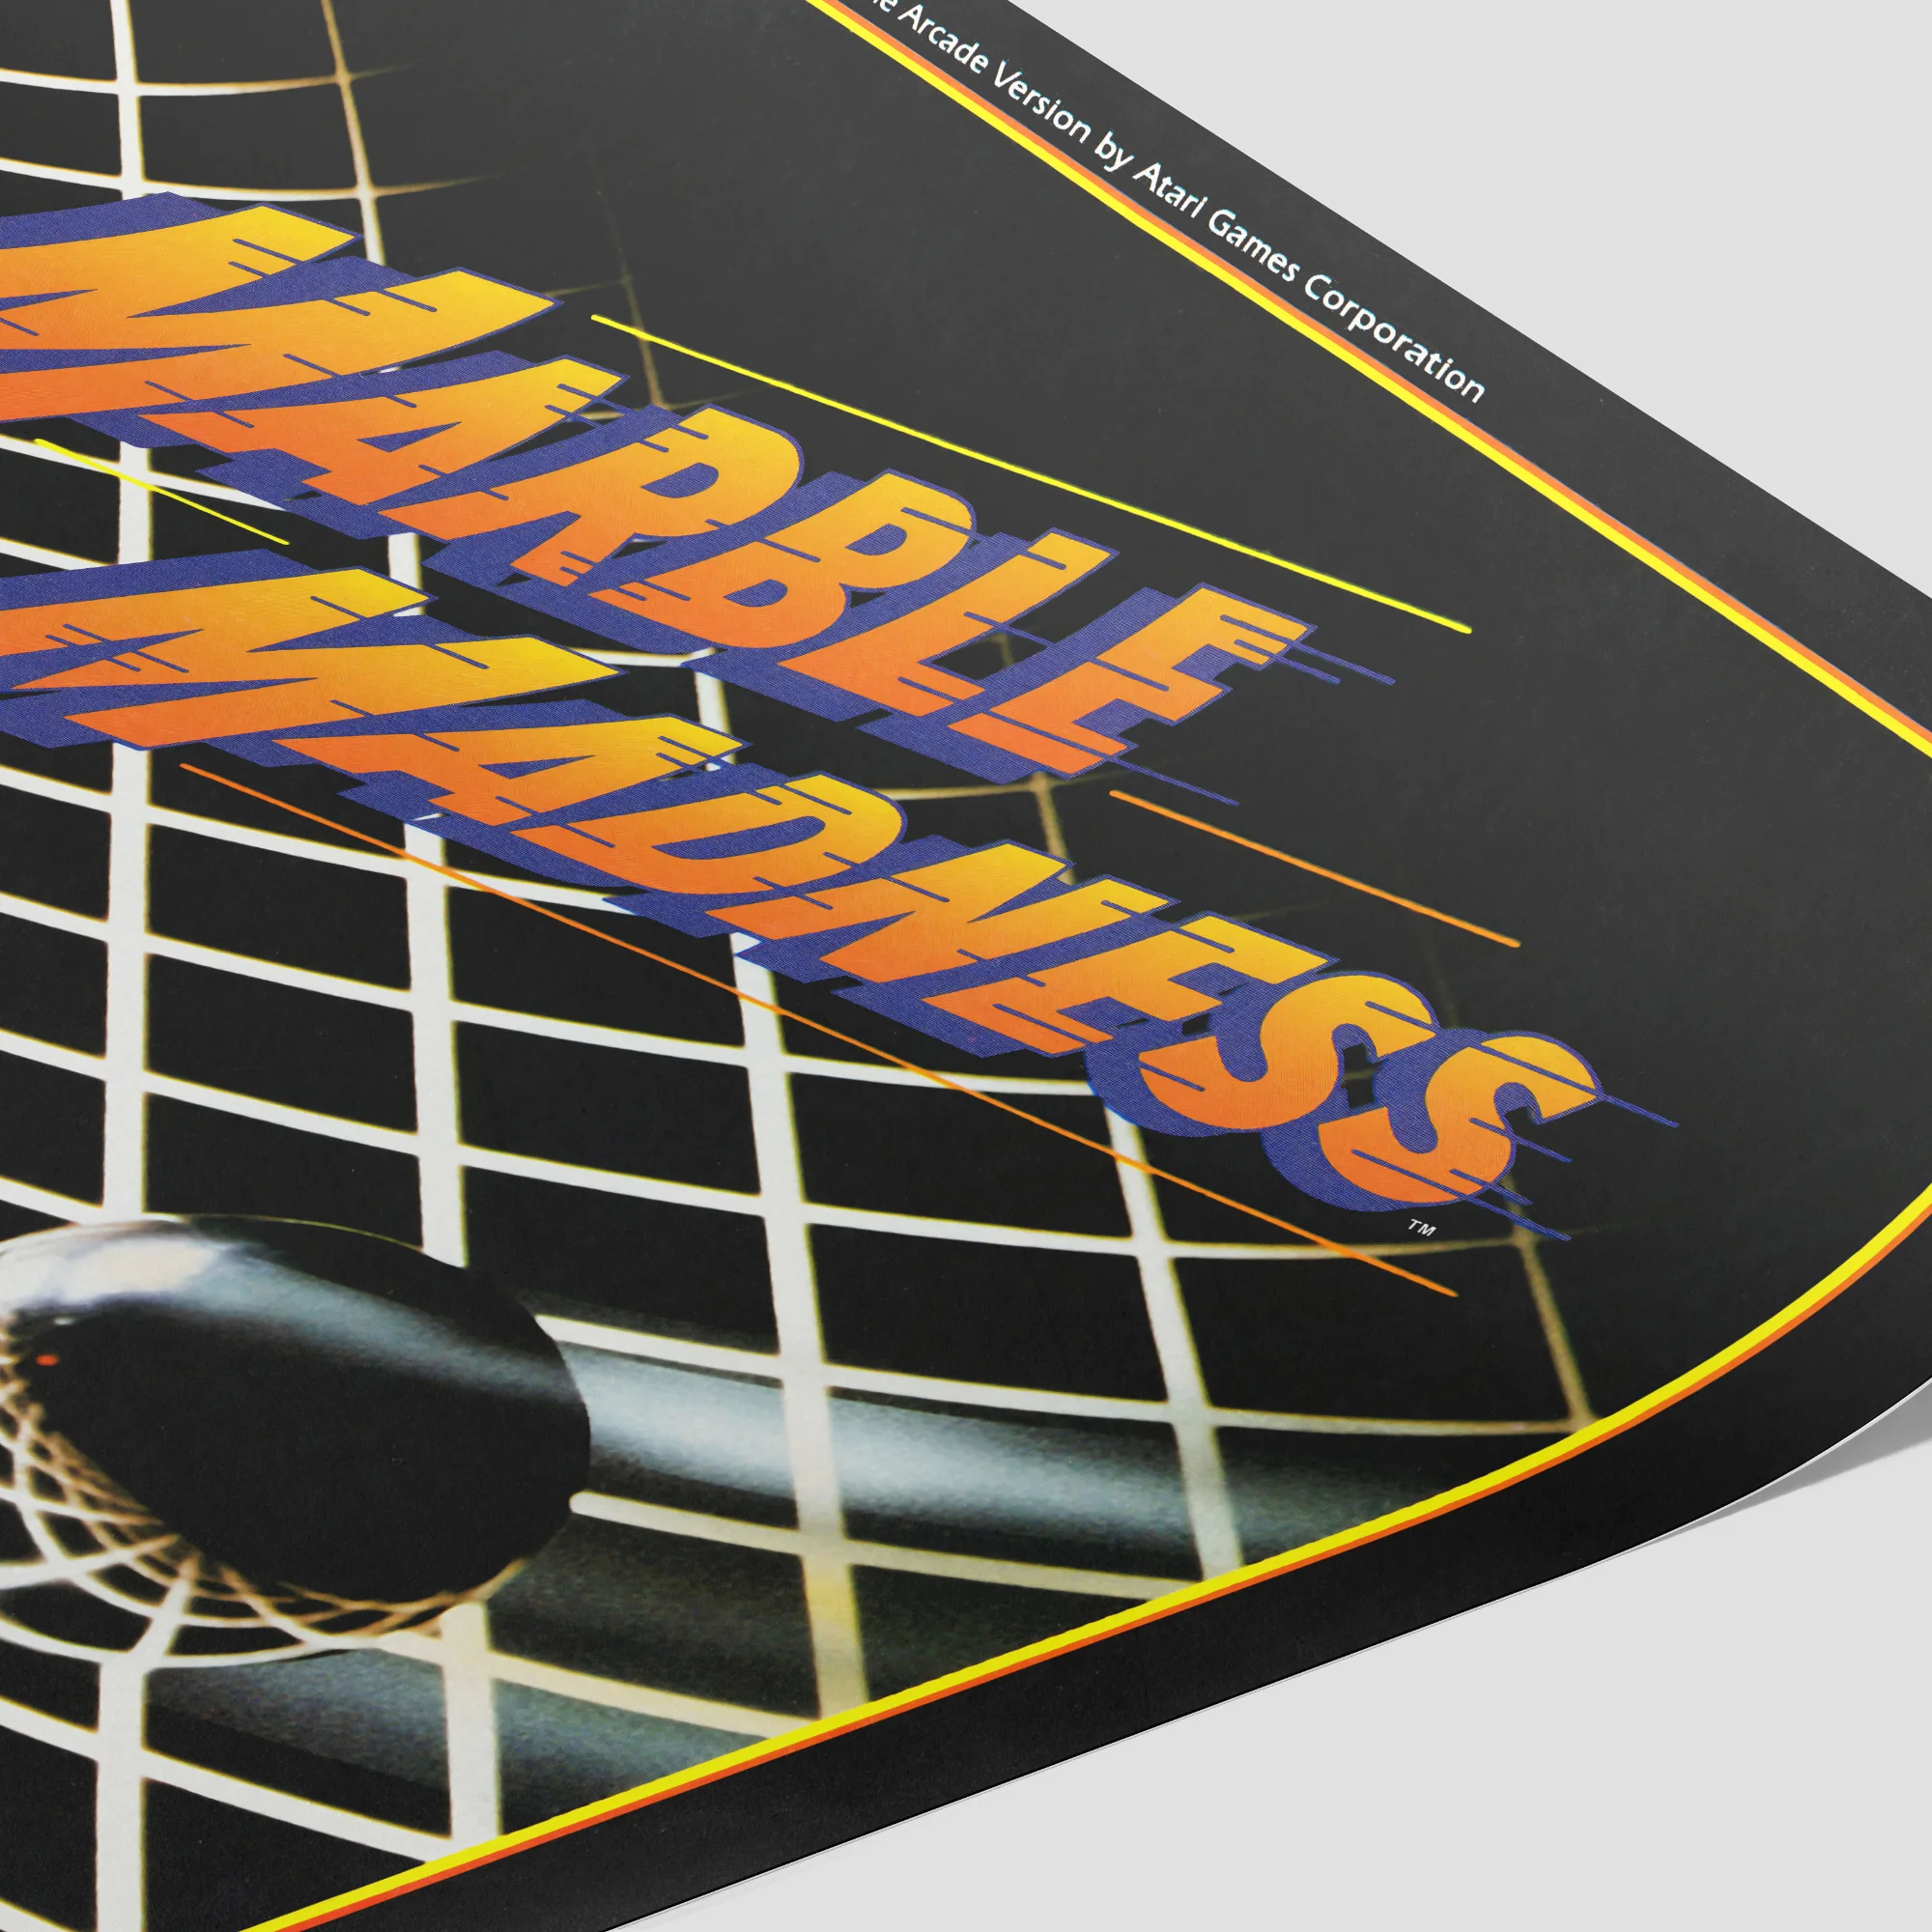 Marble Madness arcade game side panel close-up.